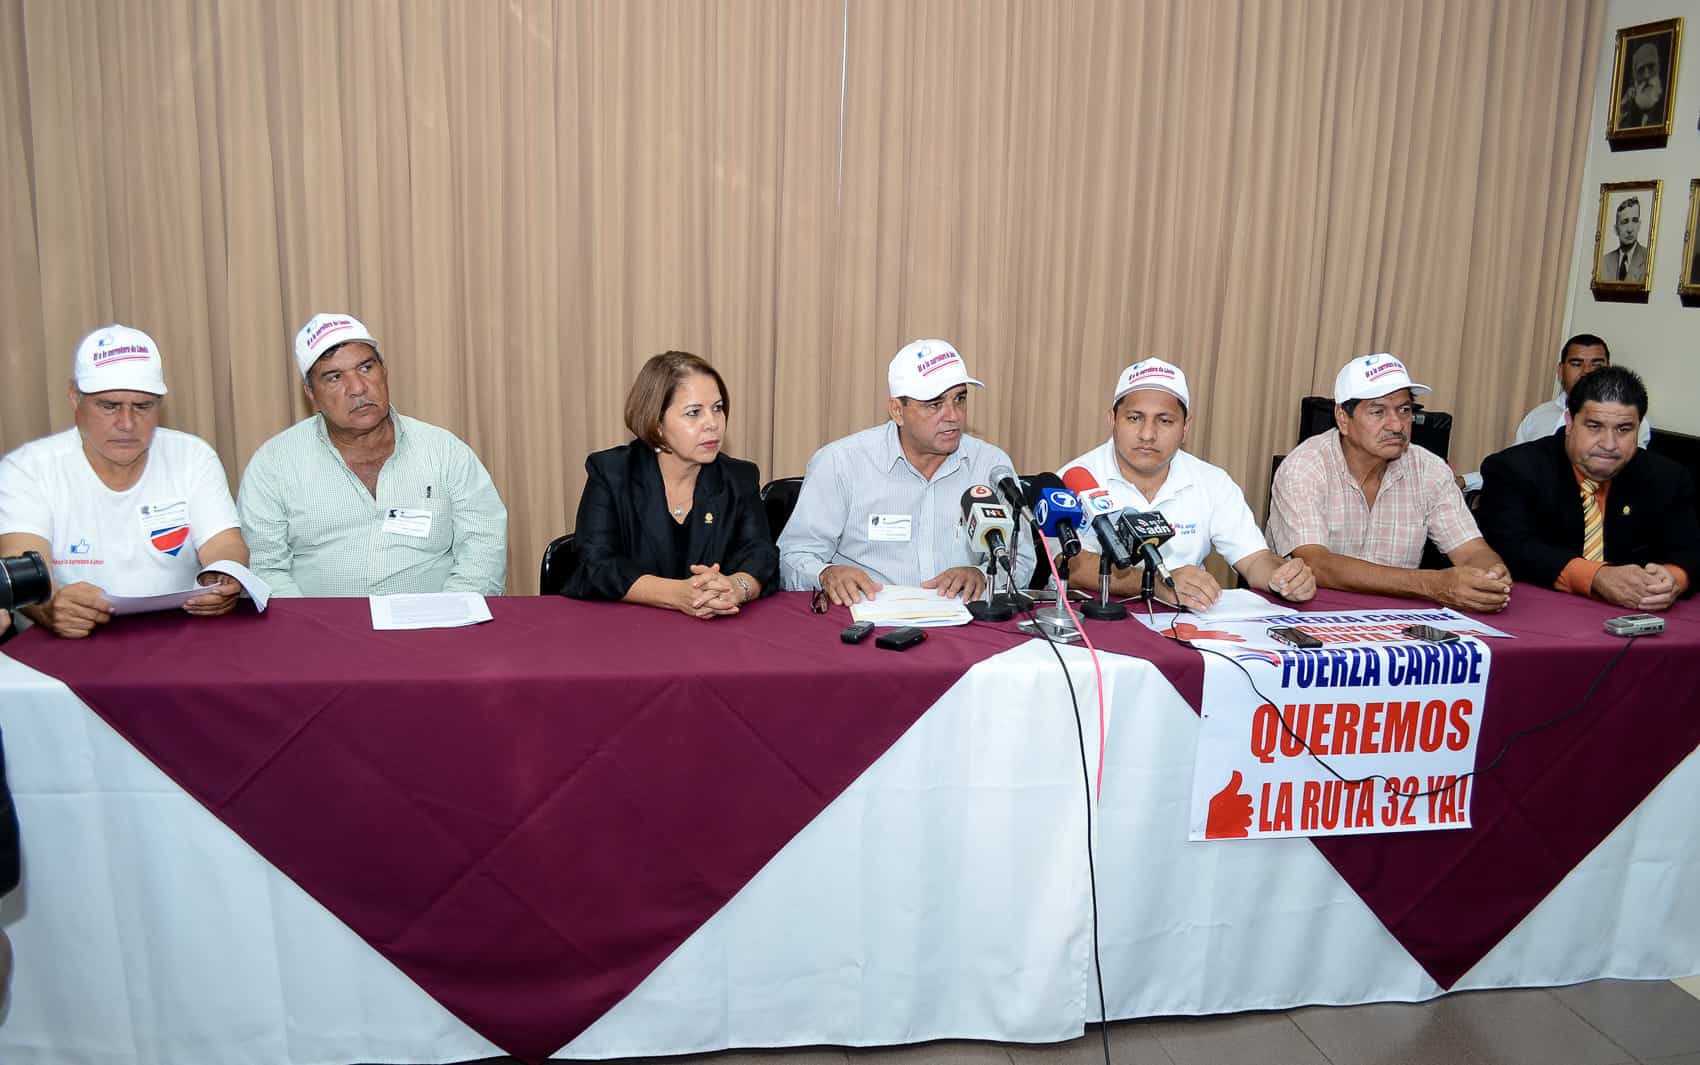 Fuerza Caribe meeting with lawmakers